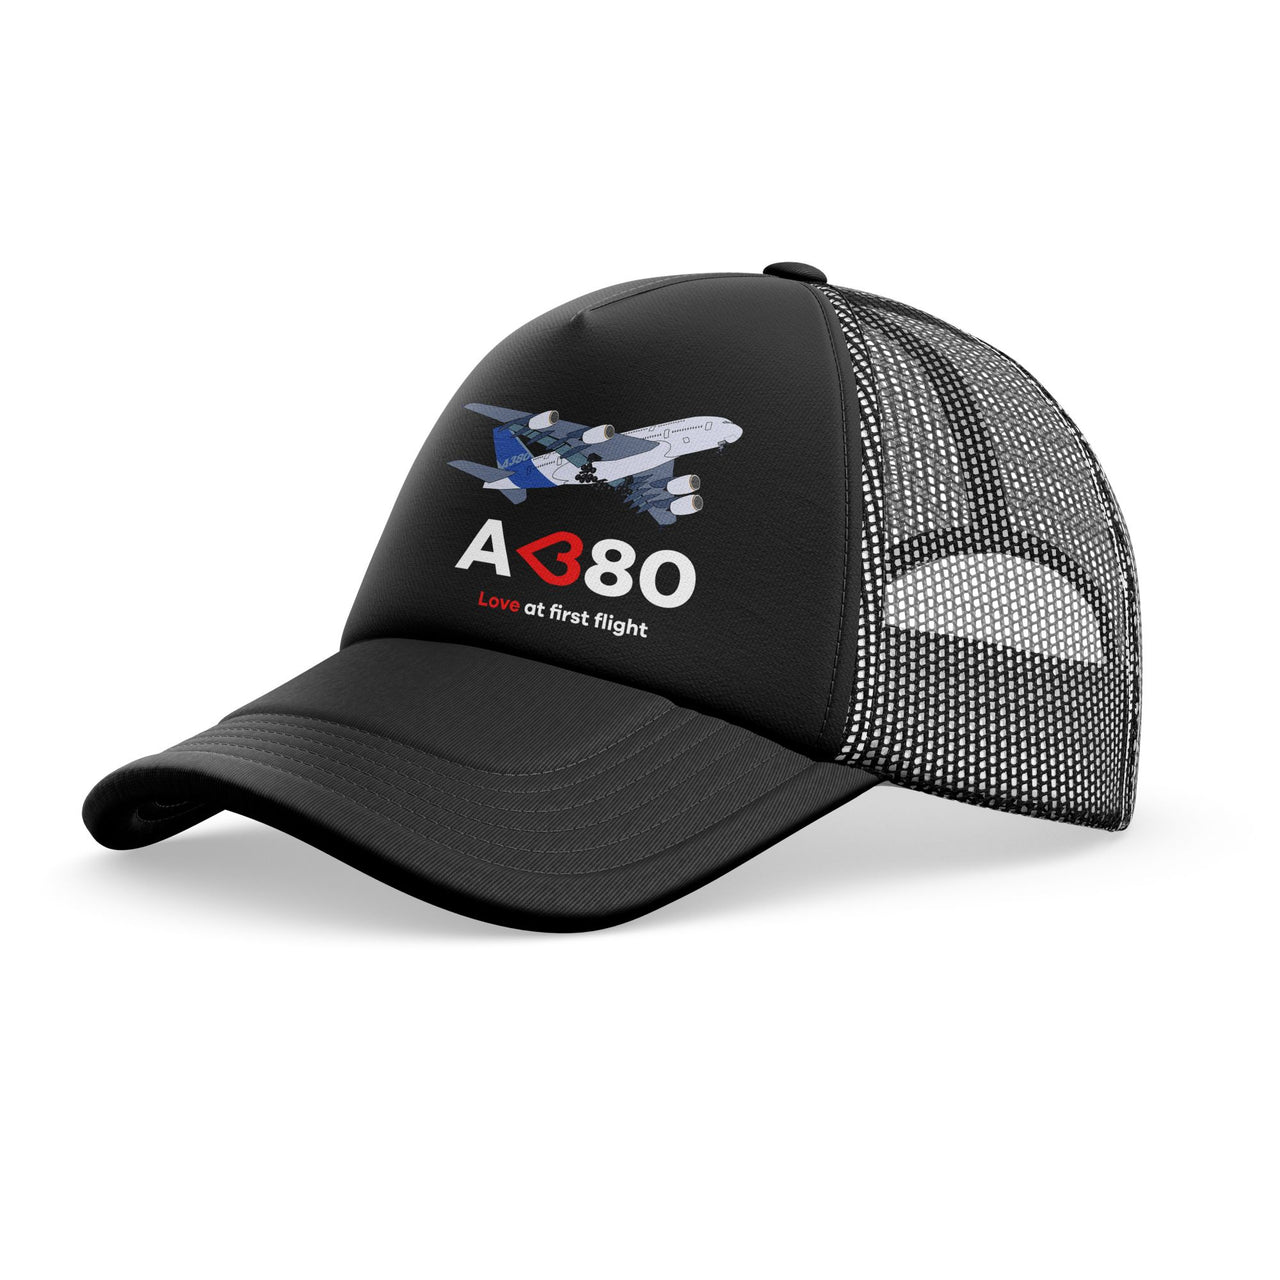 Airbus A380 Love at first flight Designed Trucker Caps & Hats